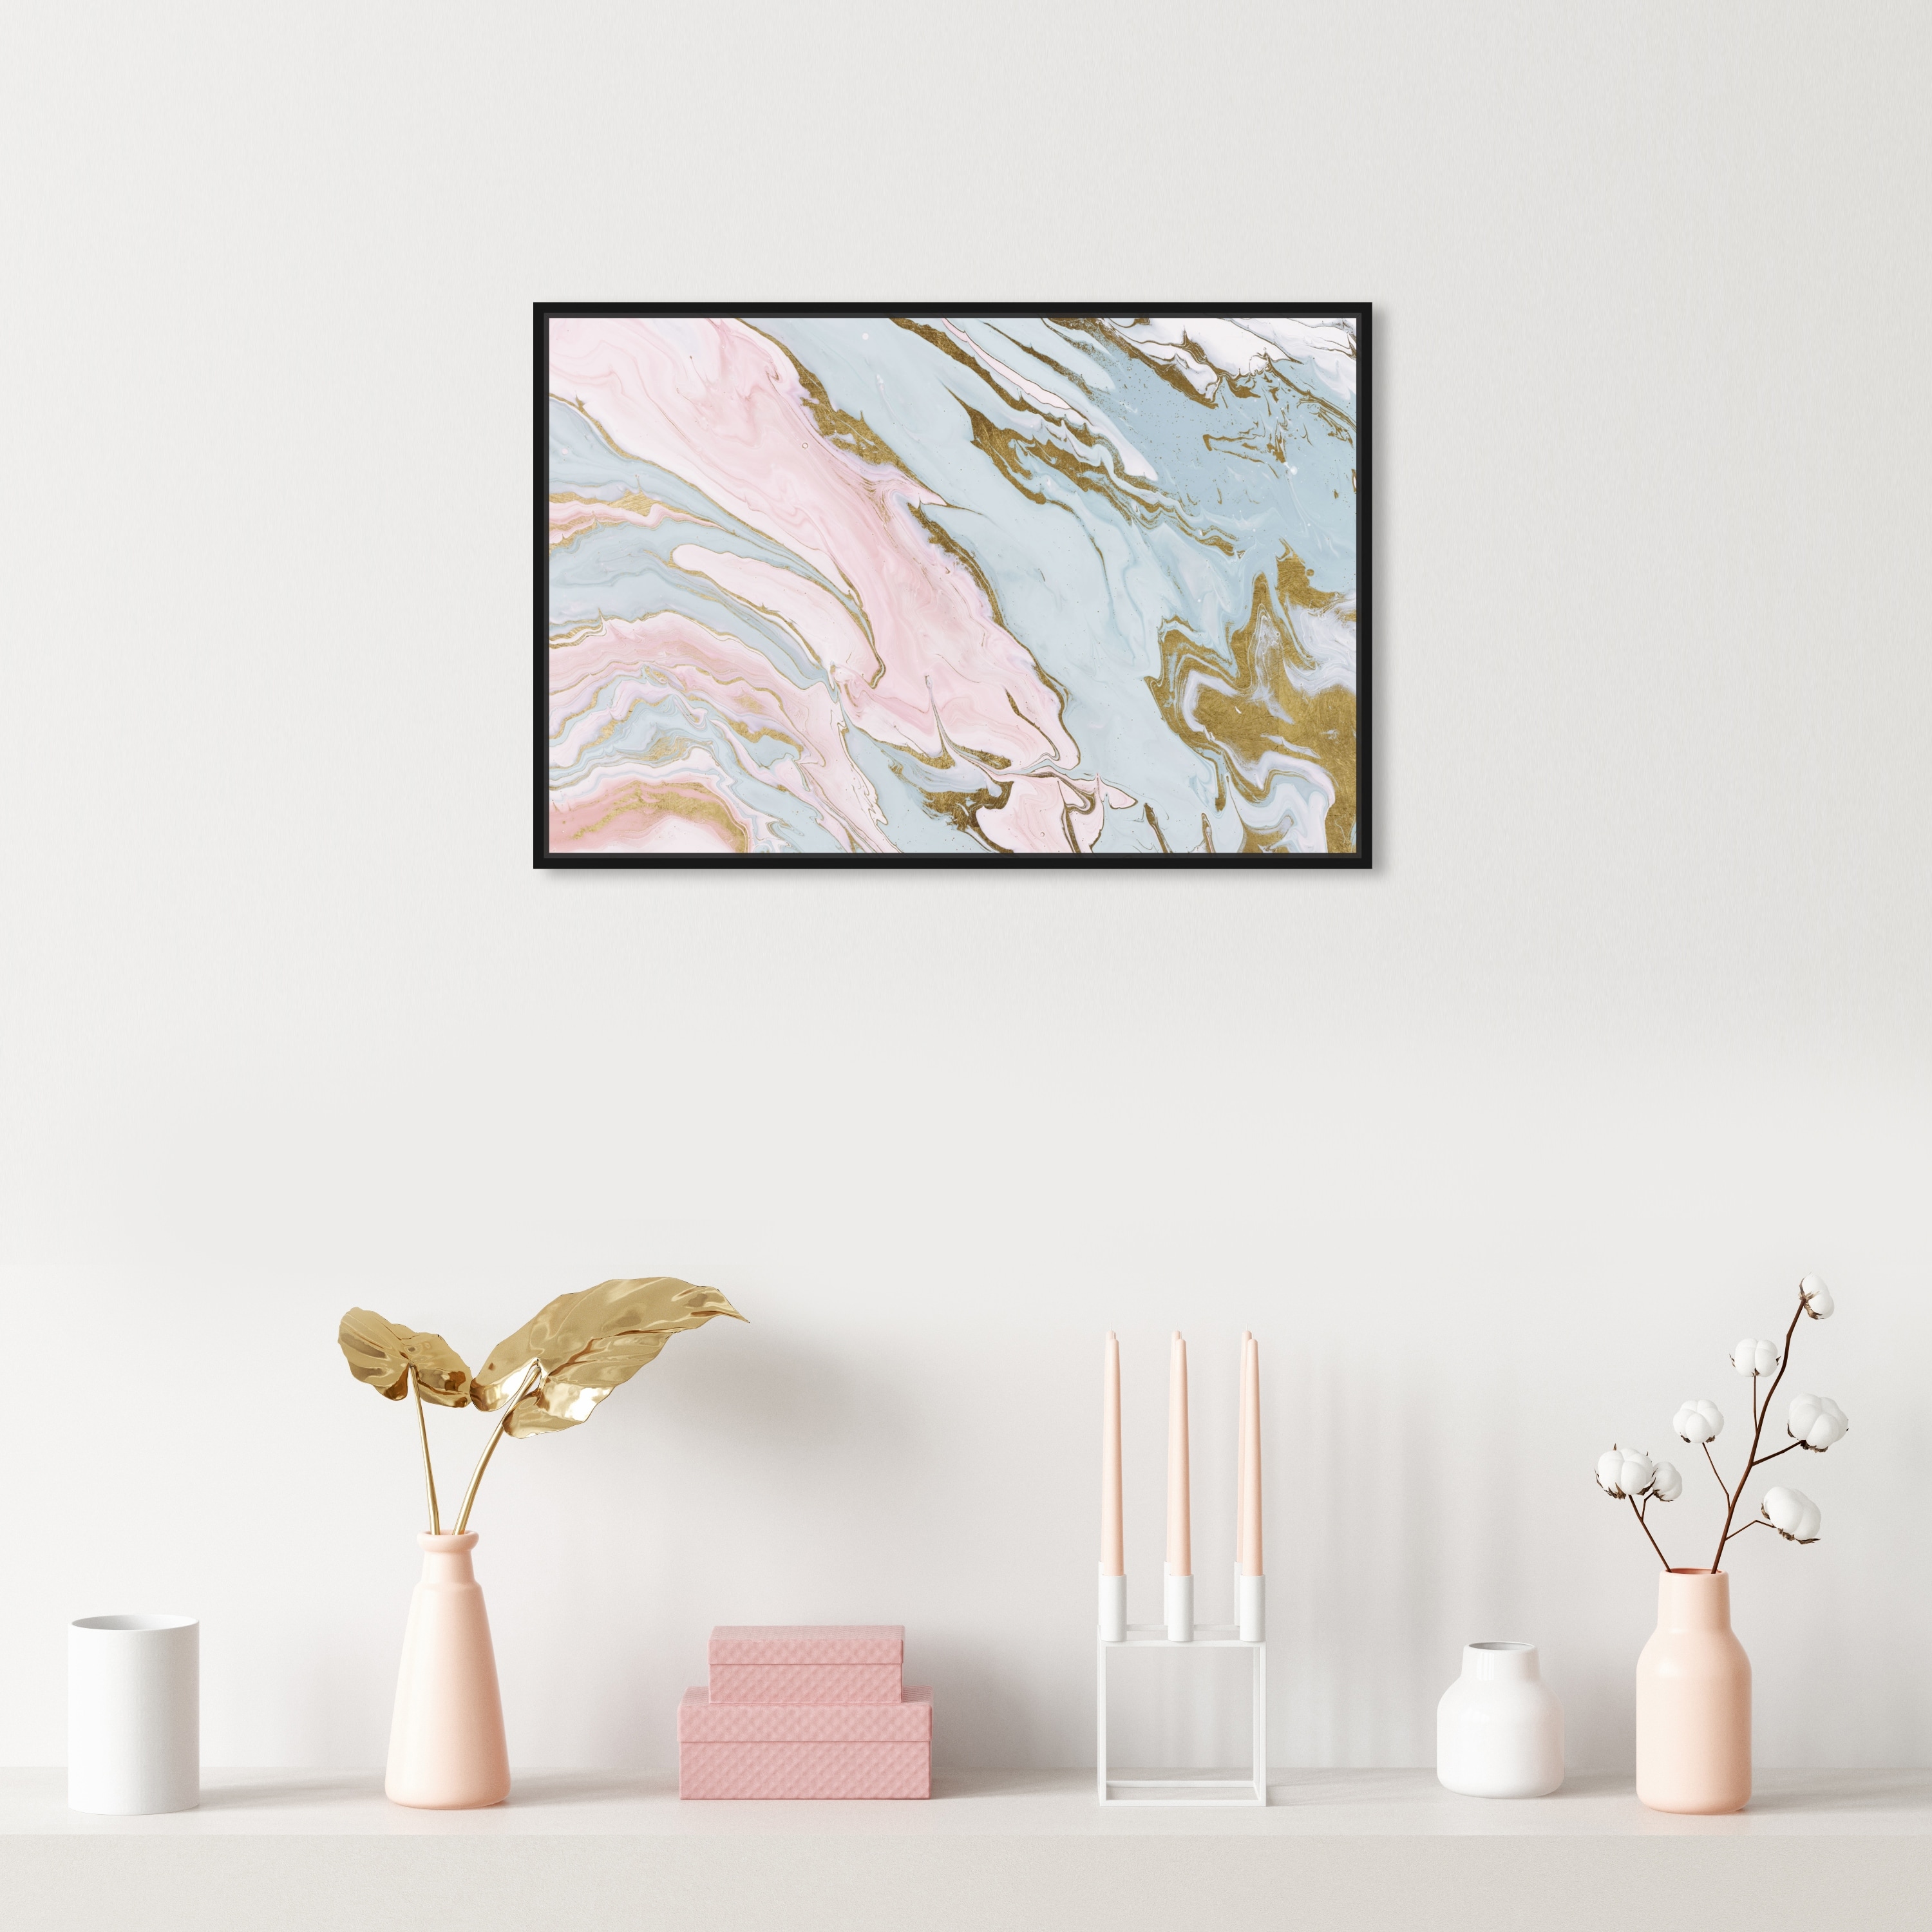 Oliver Gal 'Pastel Geode' Abstract Pink Wall Art Canvas Print